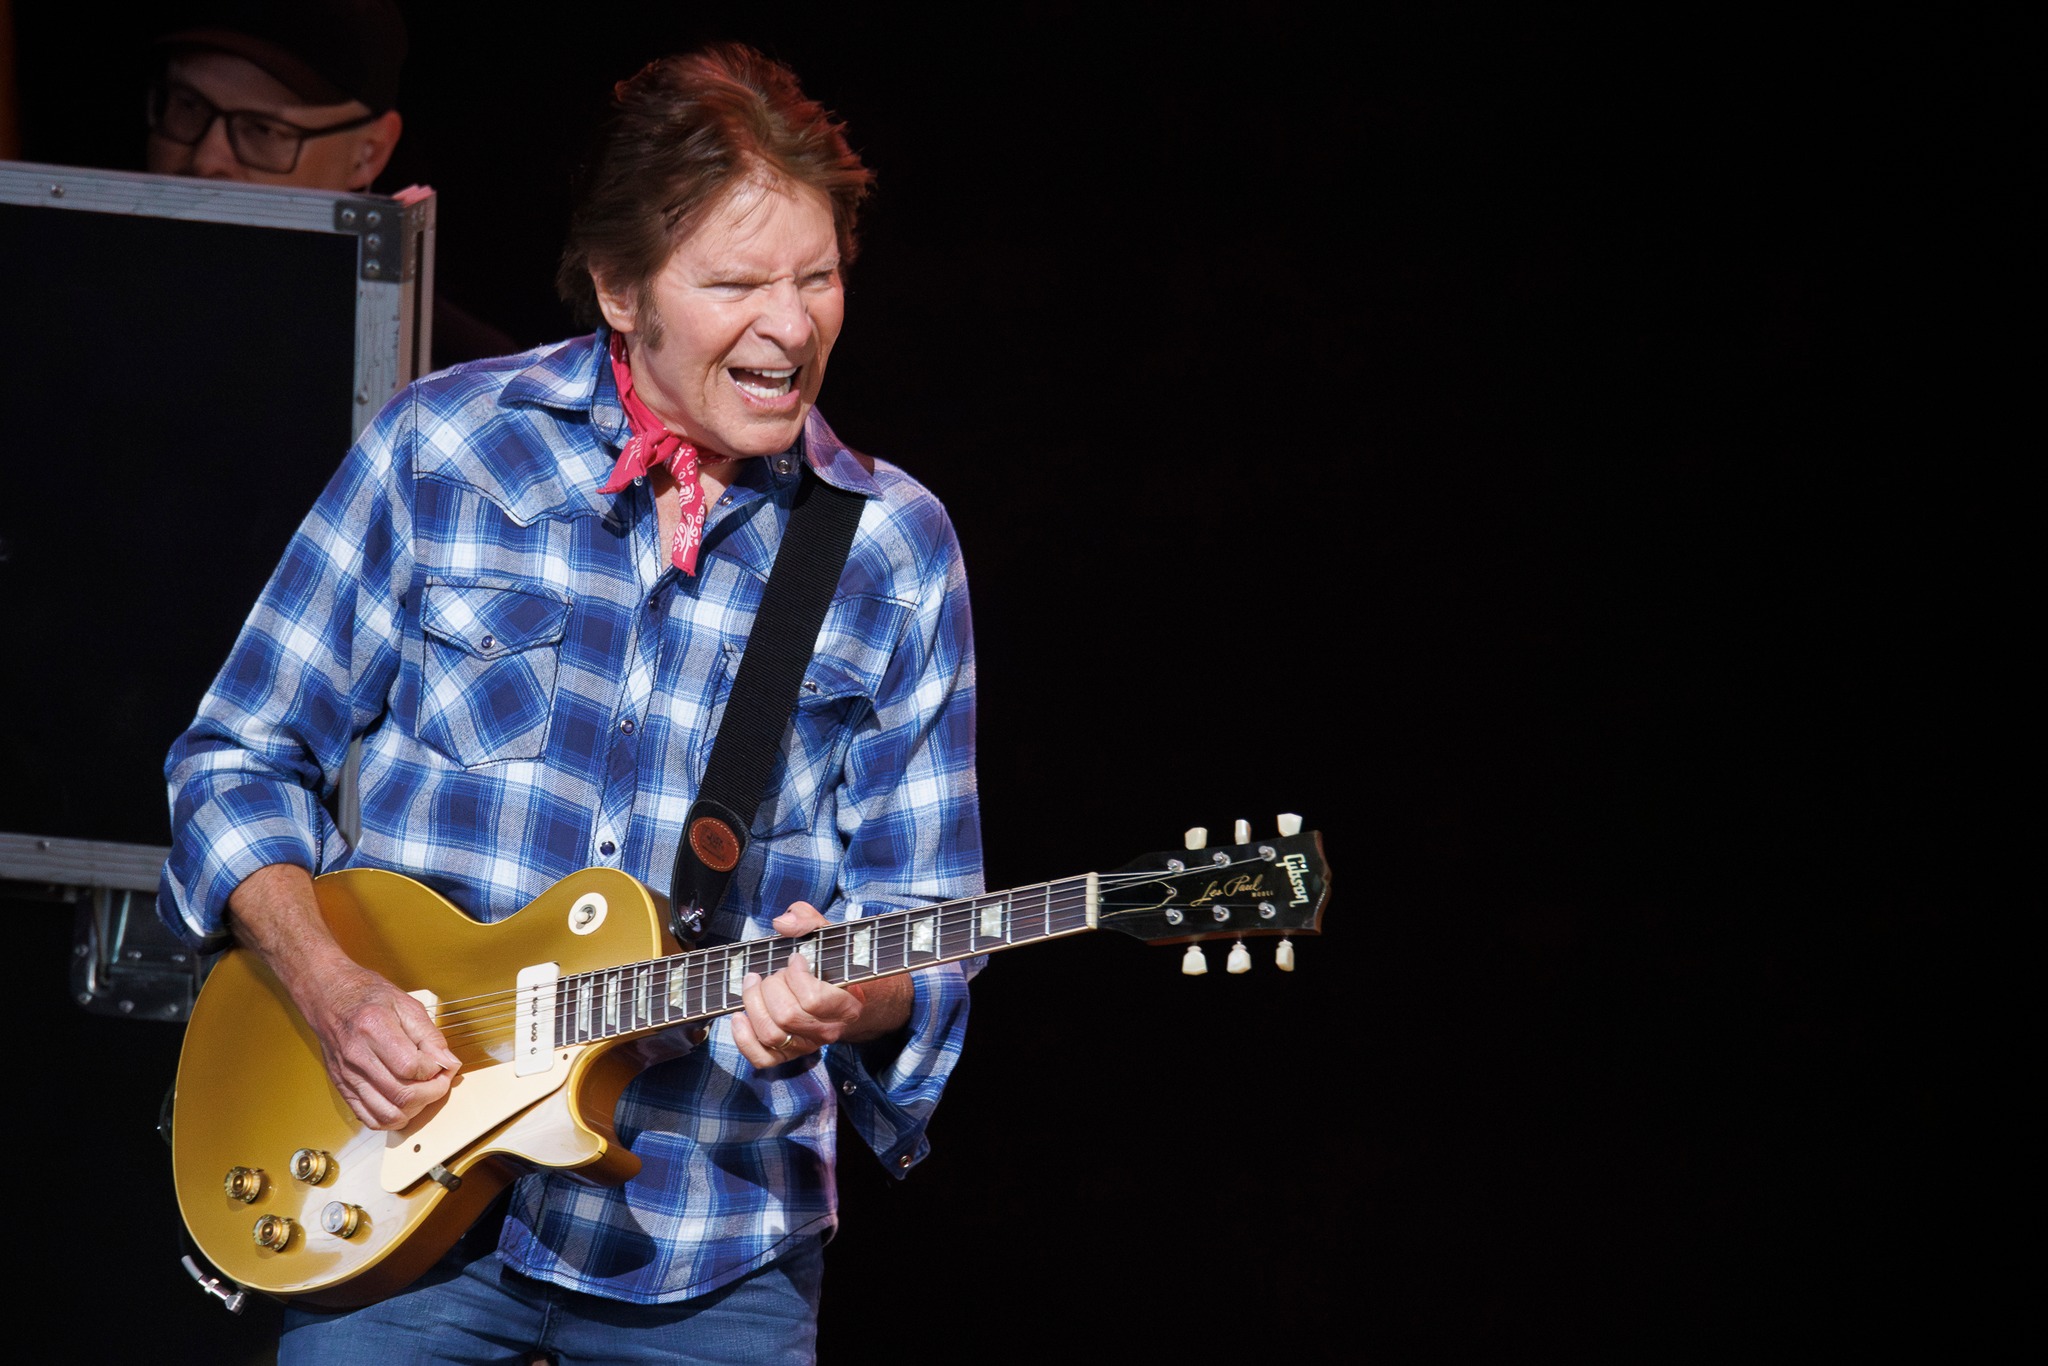 From Creedence to Centerfield: John Fogerty's Everlasting Groove